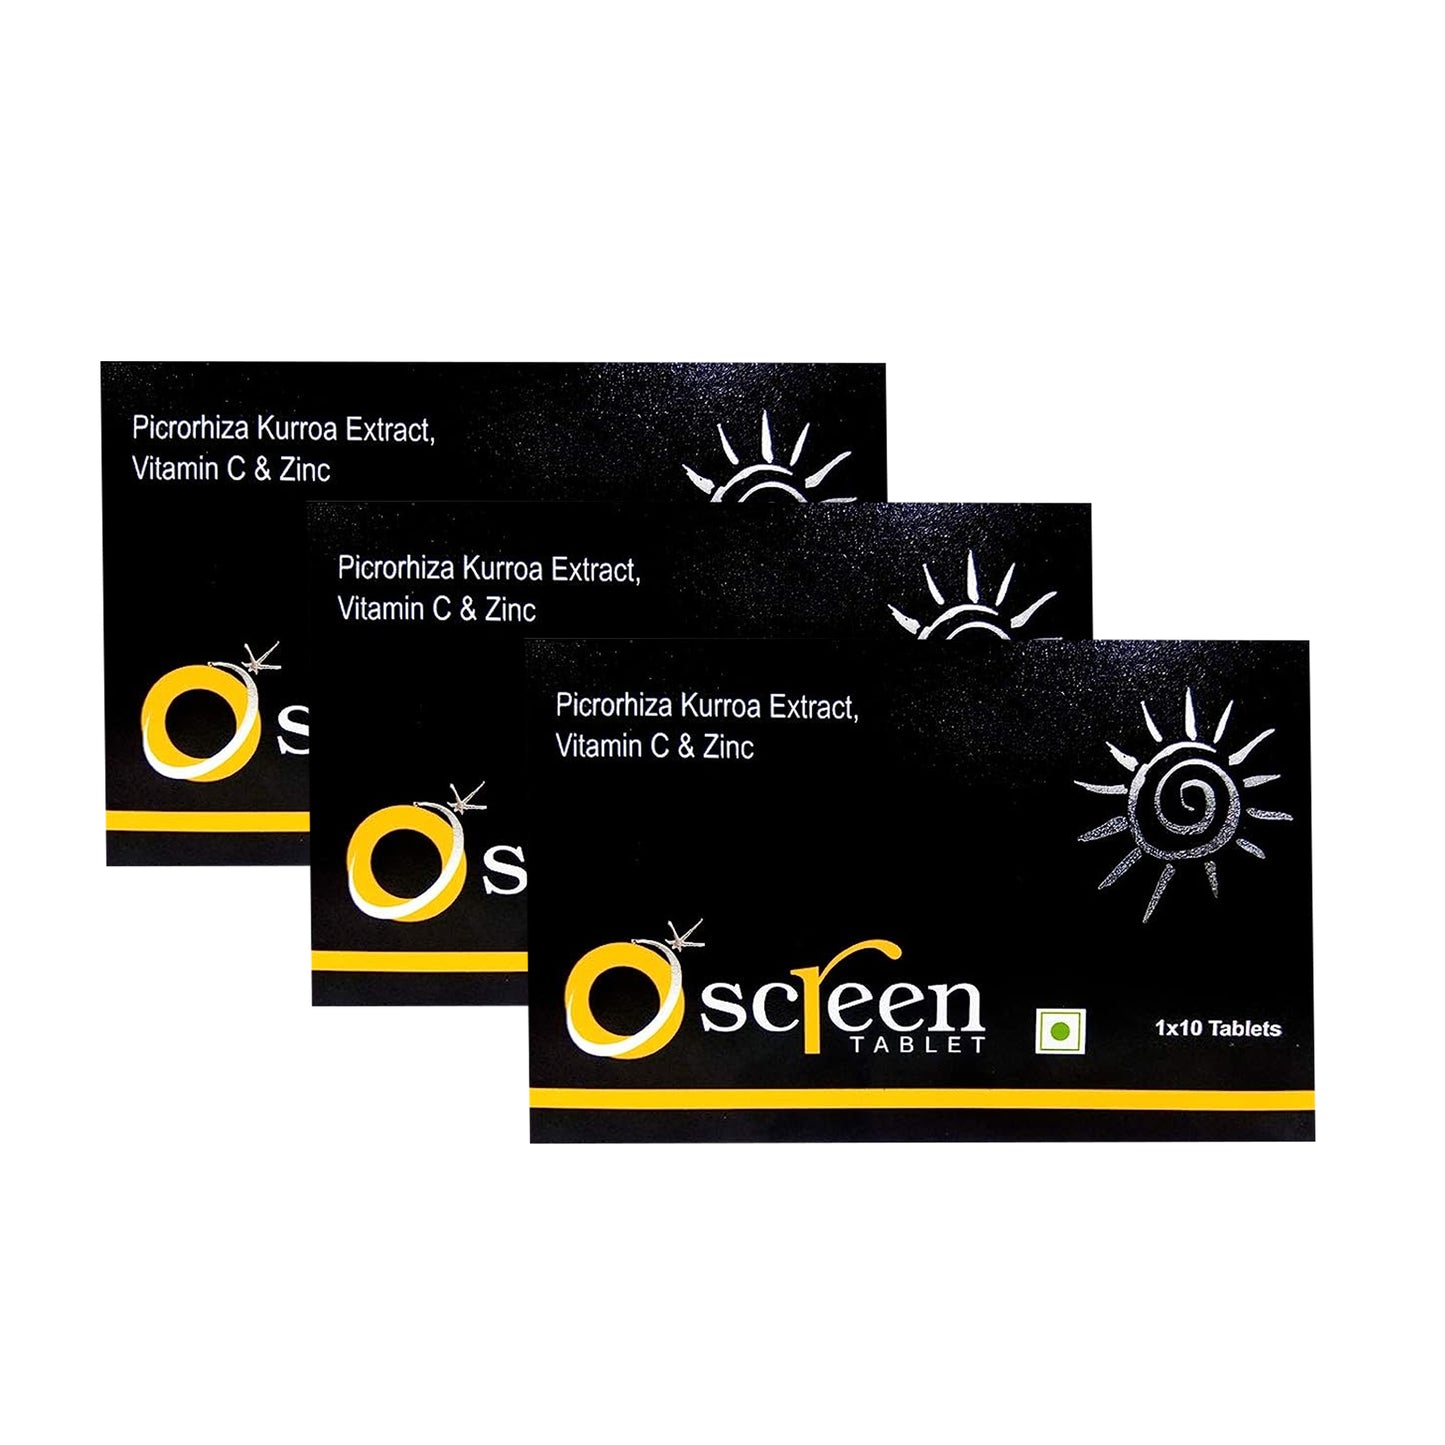 Oscreen Sunscreen, 10 tablets (Pack Of 3)